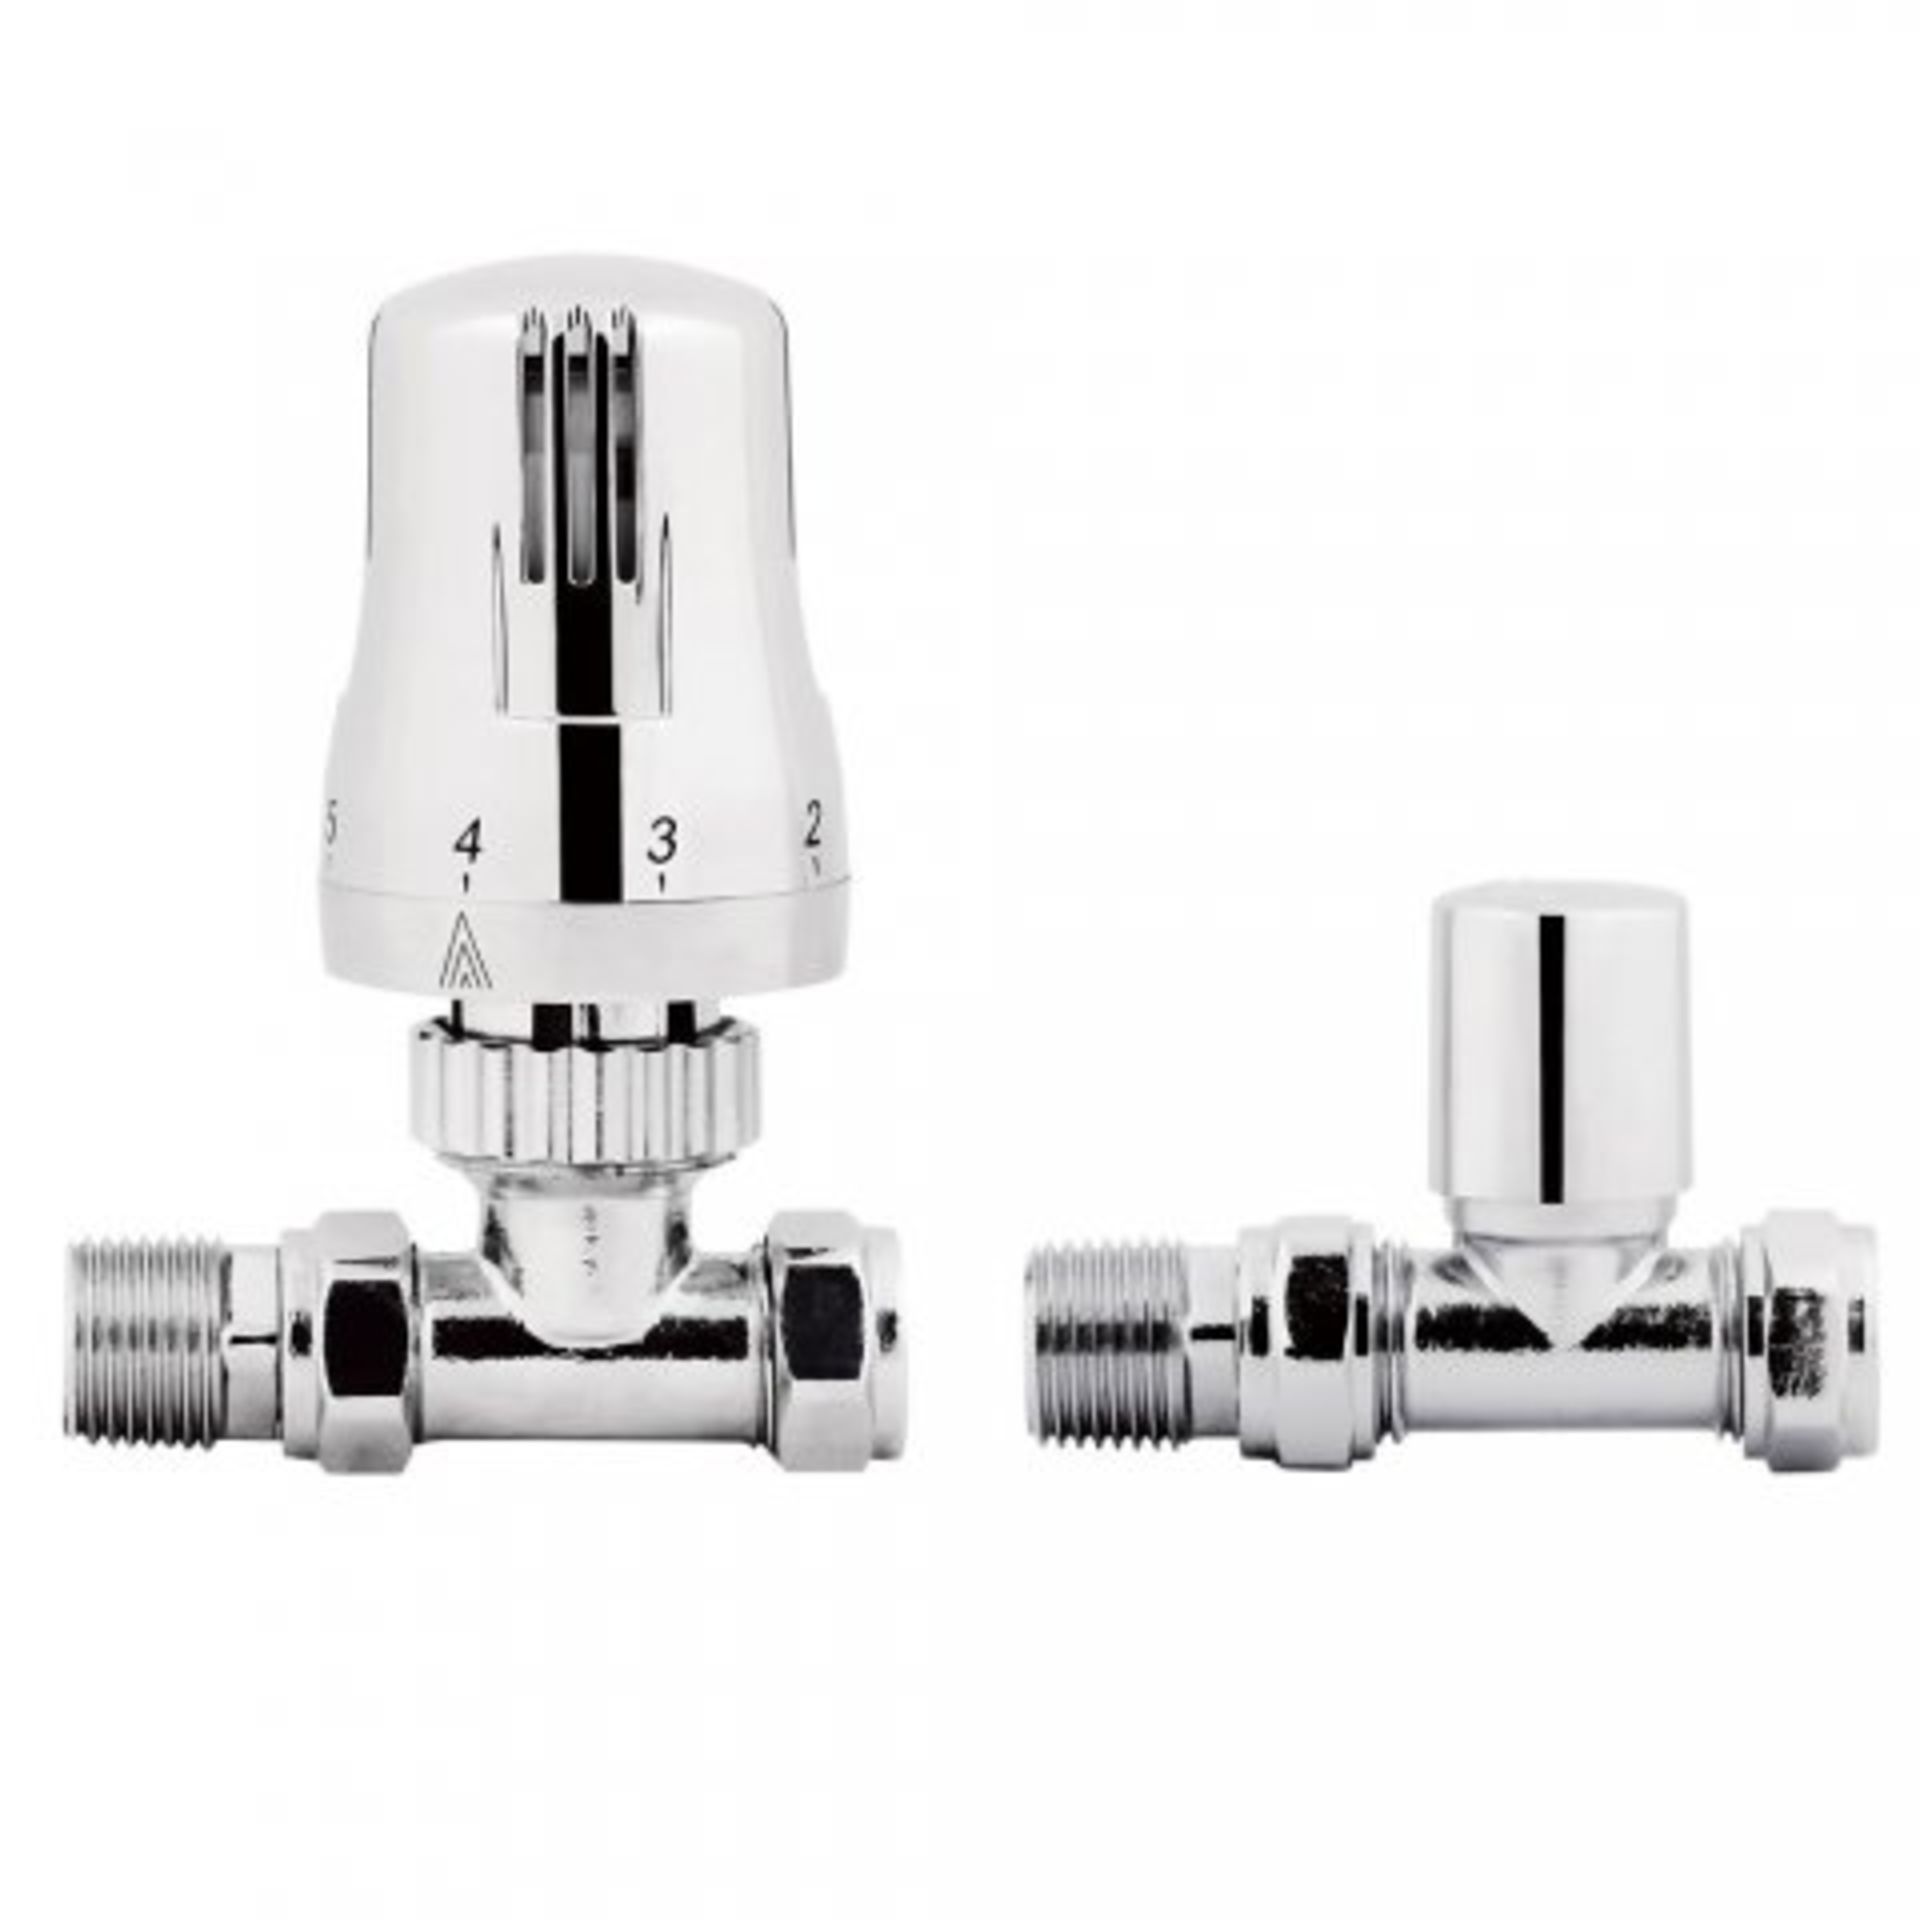 (I65) 15mm Standard Connection Thermostatic Straight Chrome Radiator Valves Made of solid brass, our